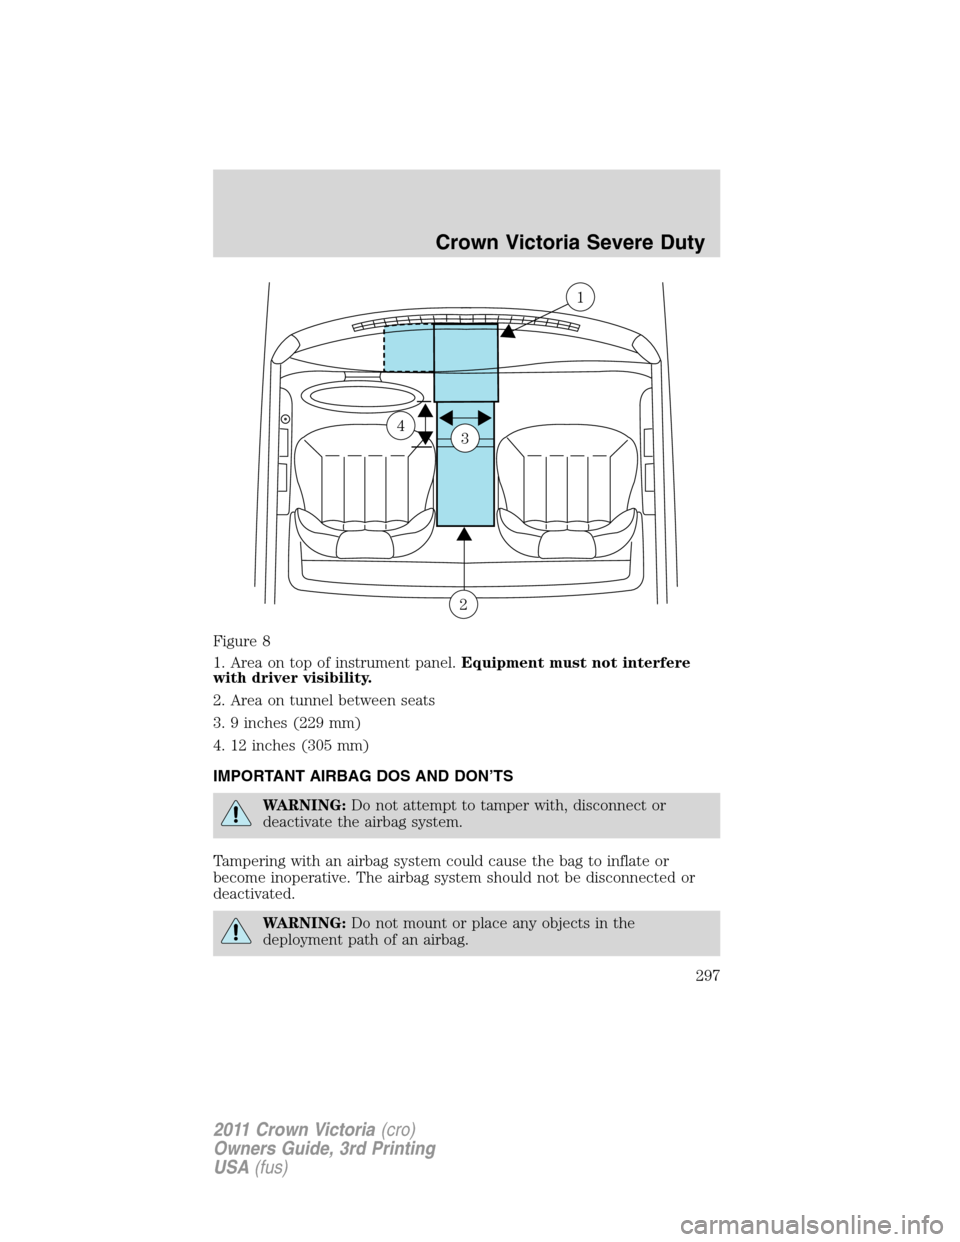 Mercury Grand Marquis 1011  Owners Manuals Figure 8
1. Area on top of instrument panel.Equipment must not interfere
with driver visibility.
2. Area on tunnel between seats
3. 9 inches (229 mm)
4. 12 inches (305 mm)
IMPORTANT AIRBAG DOS AND DON